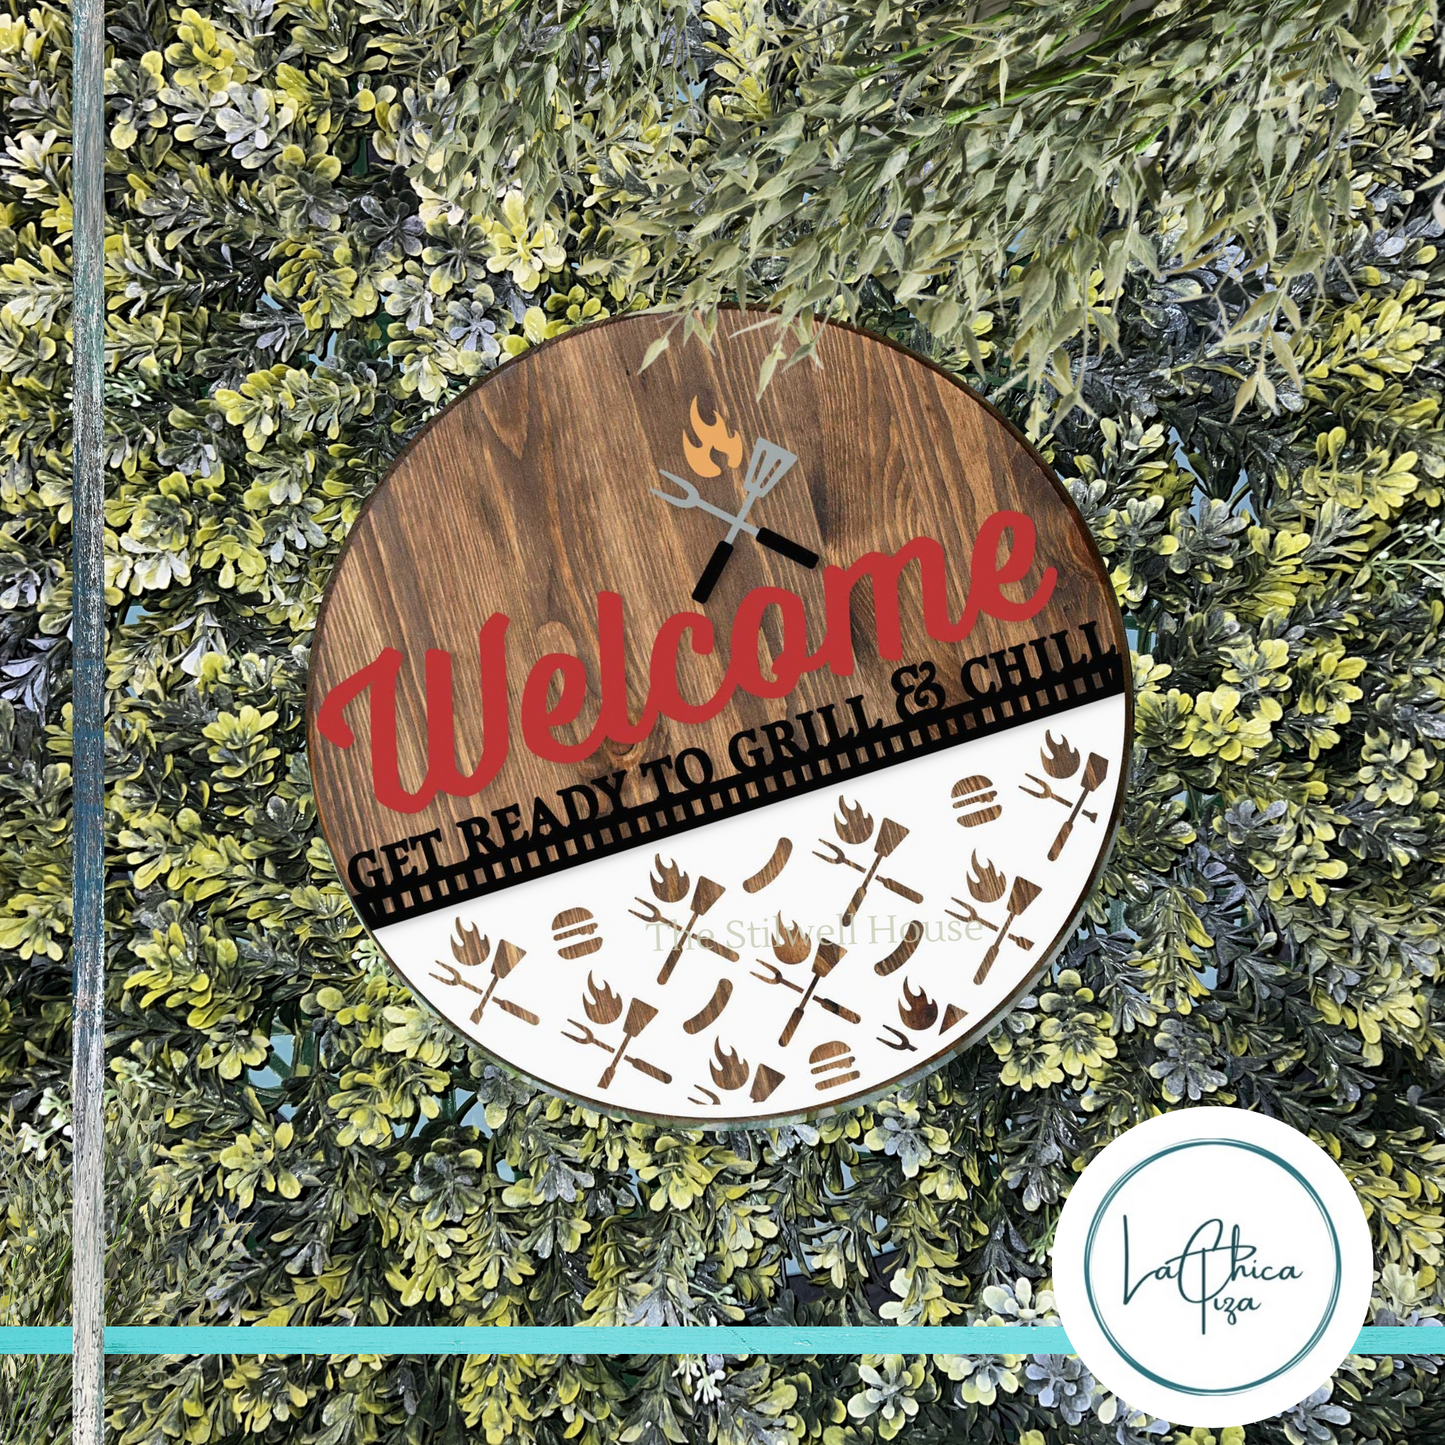 Welcome Get ready to Grill  - Round  Wood Door Sign | Hanger | ChicaTiza